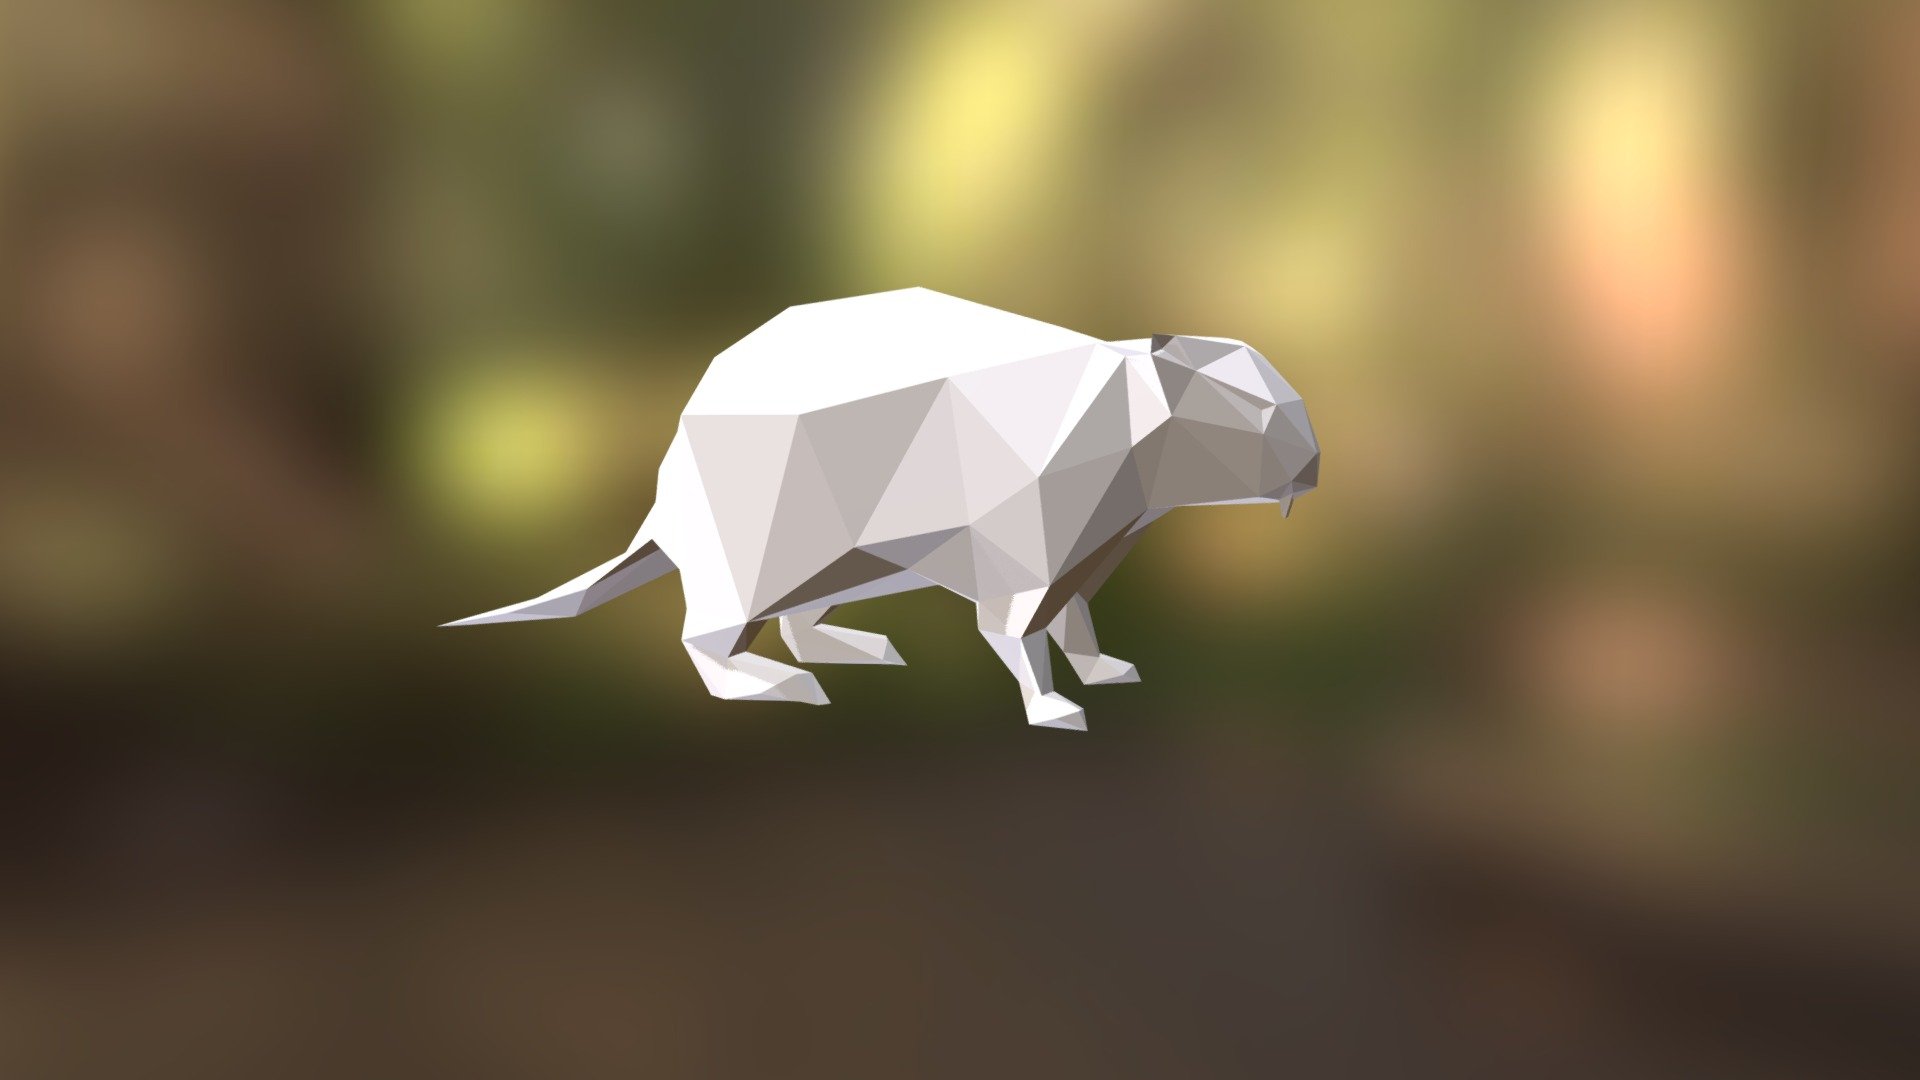 Low Poly 3D model for 3D printing. Beaver Low Poly sculpture.  You can find this model for 3D printing in my shop:  -link removed-  Reference model: http://www.cadnav.com - Beaver low poly model for 3D printing 3d model